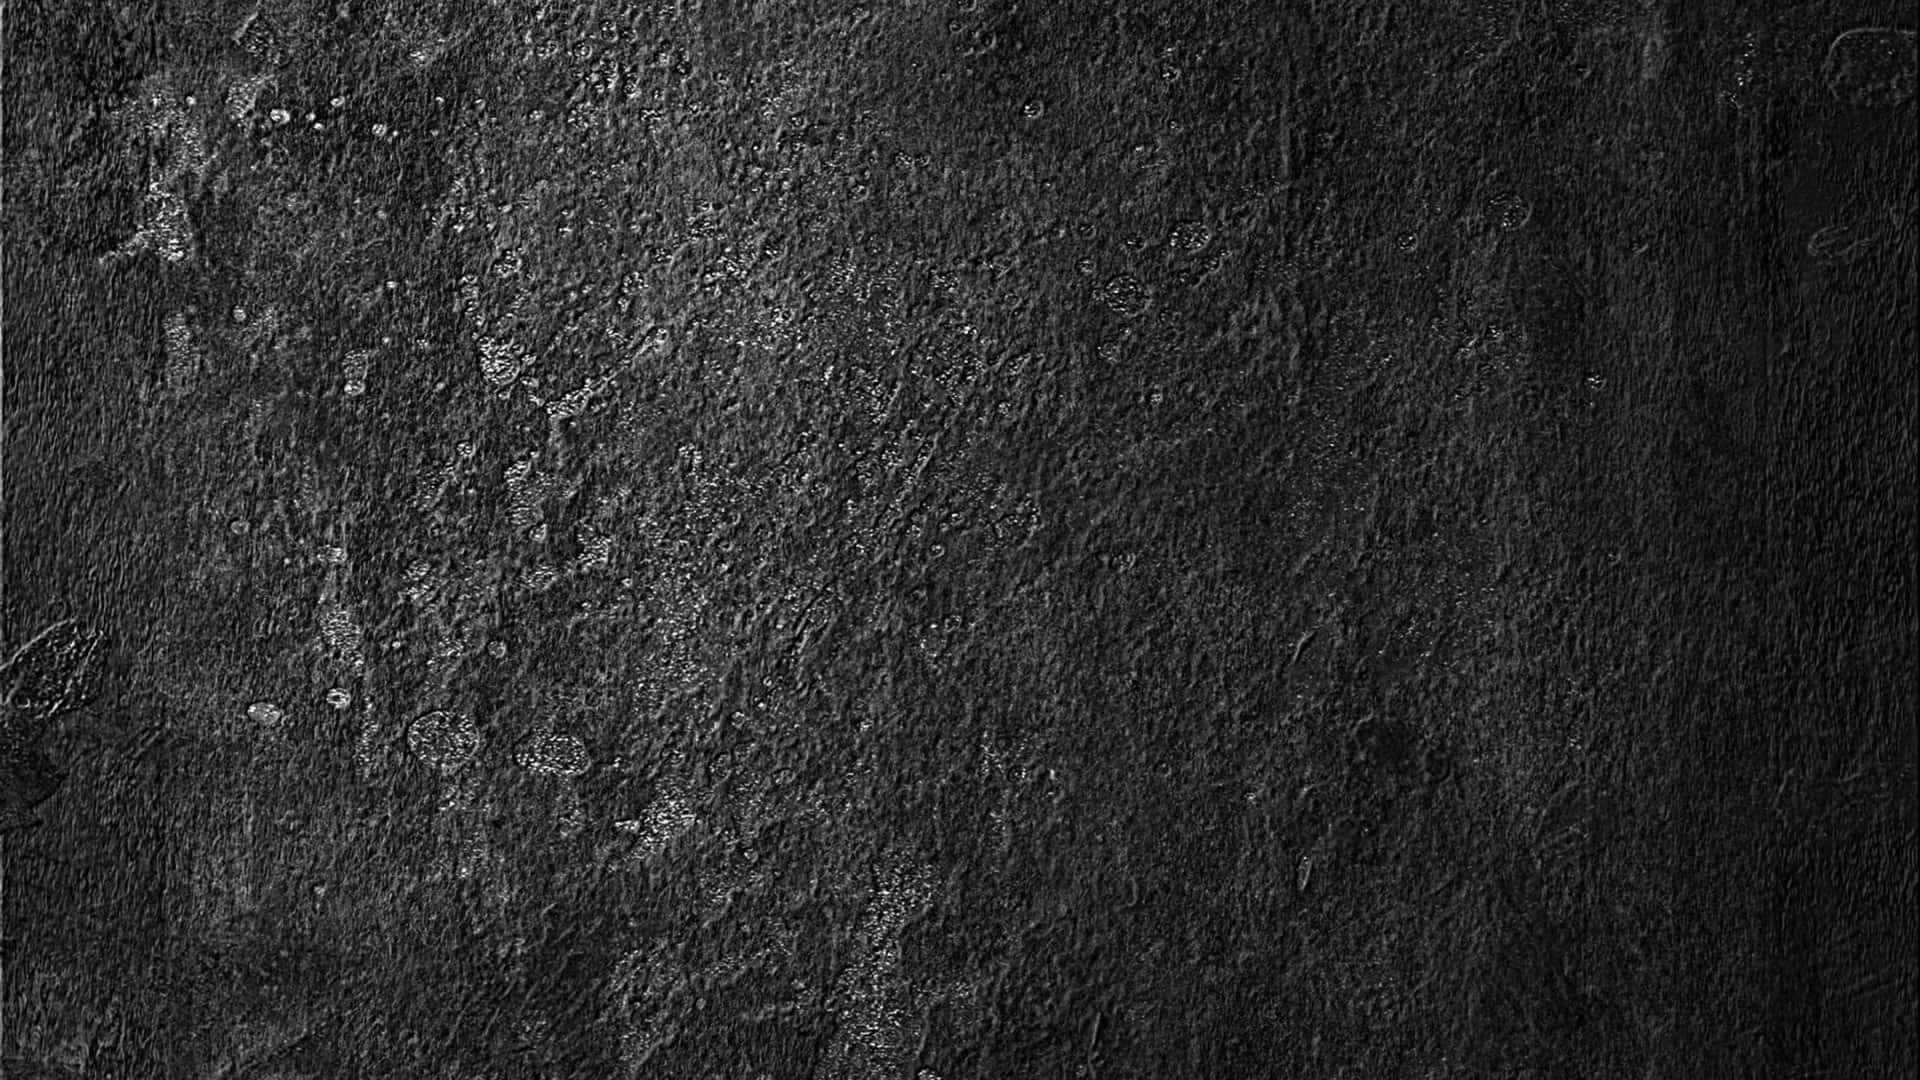 Black Cement Concrete Wall Texture Abstract Wallpaper Grunge Stock Photo   Image of abandoned closeup 178229620